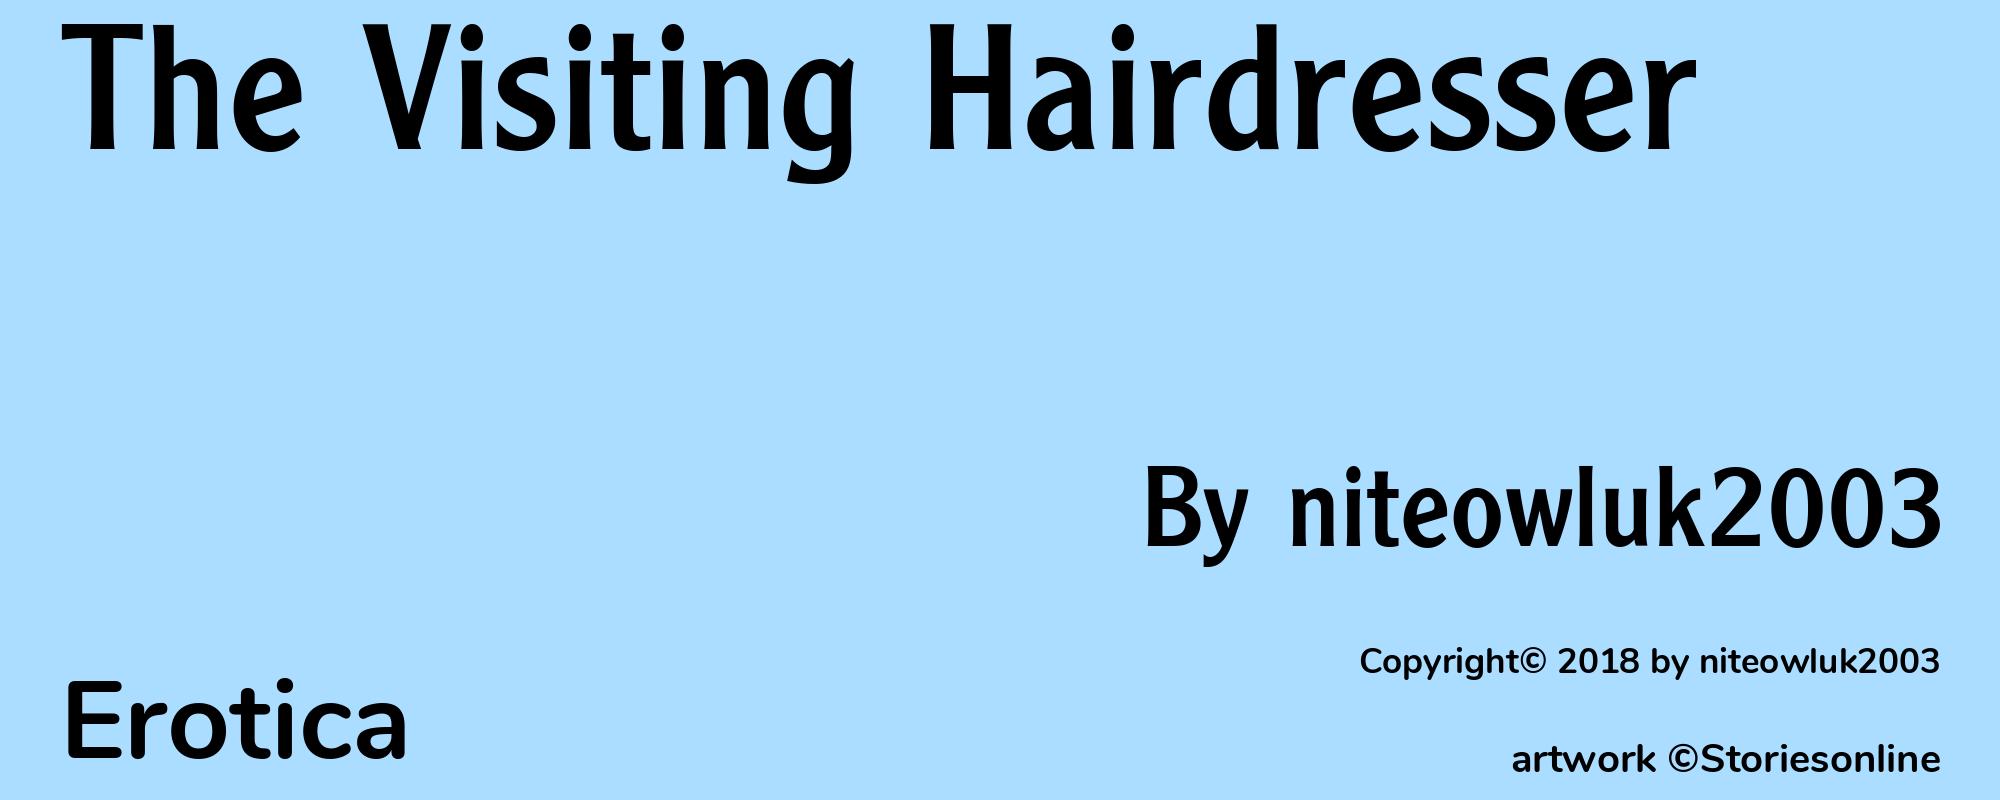 The Visiting Hairdresser - Cover